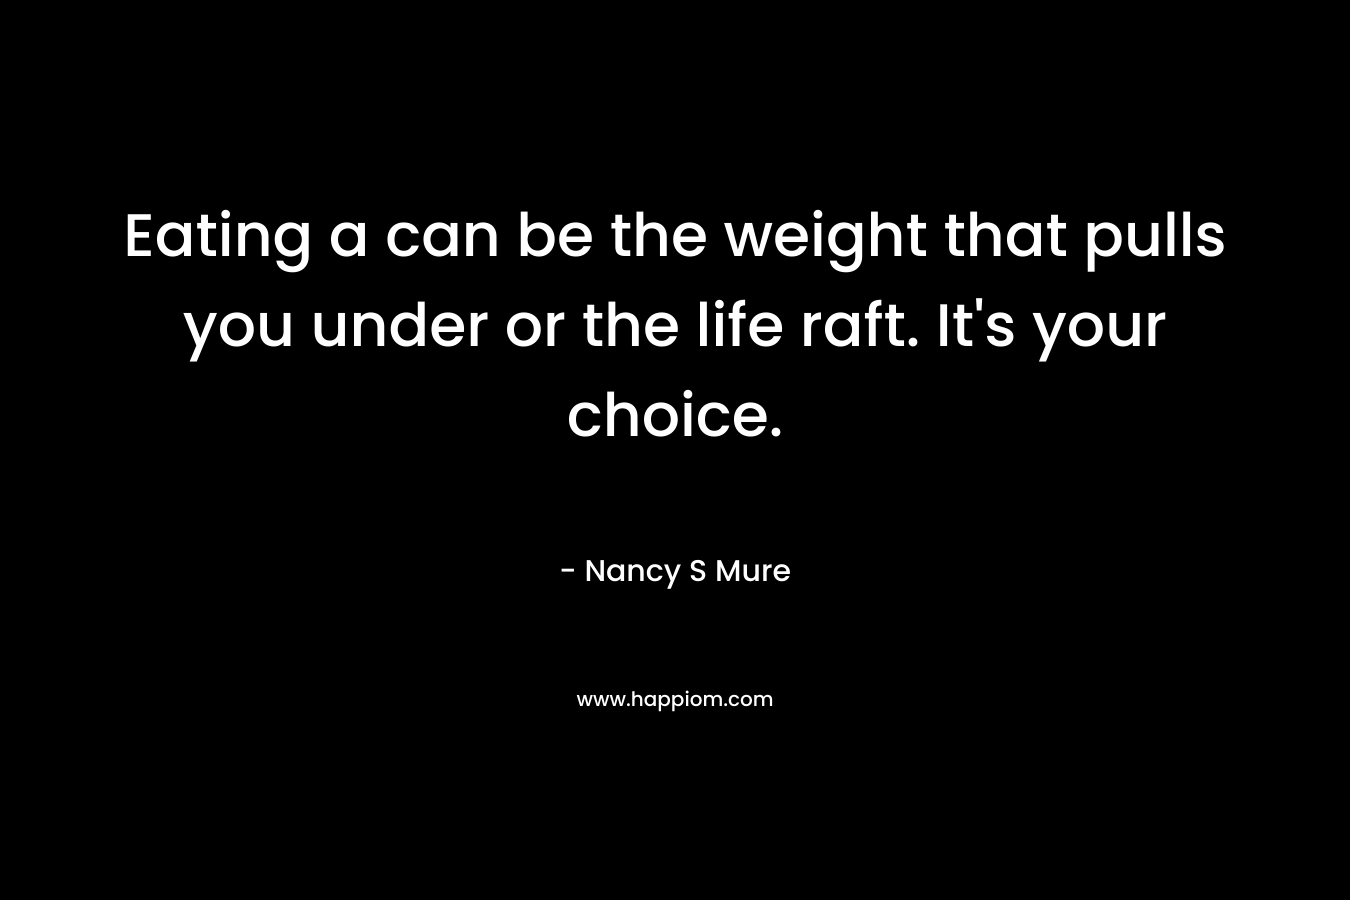 Eating a can be the weight that pulls you under or the life raft. It's your choice.